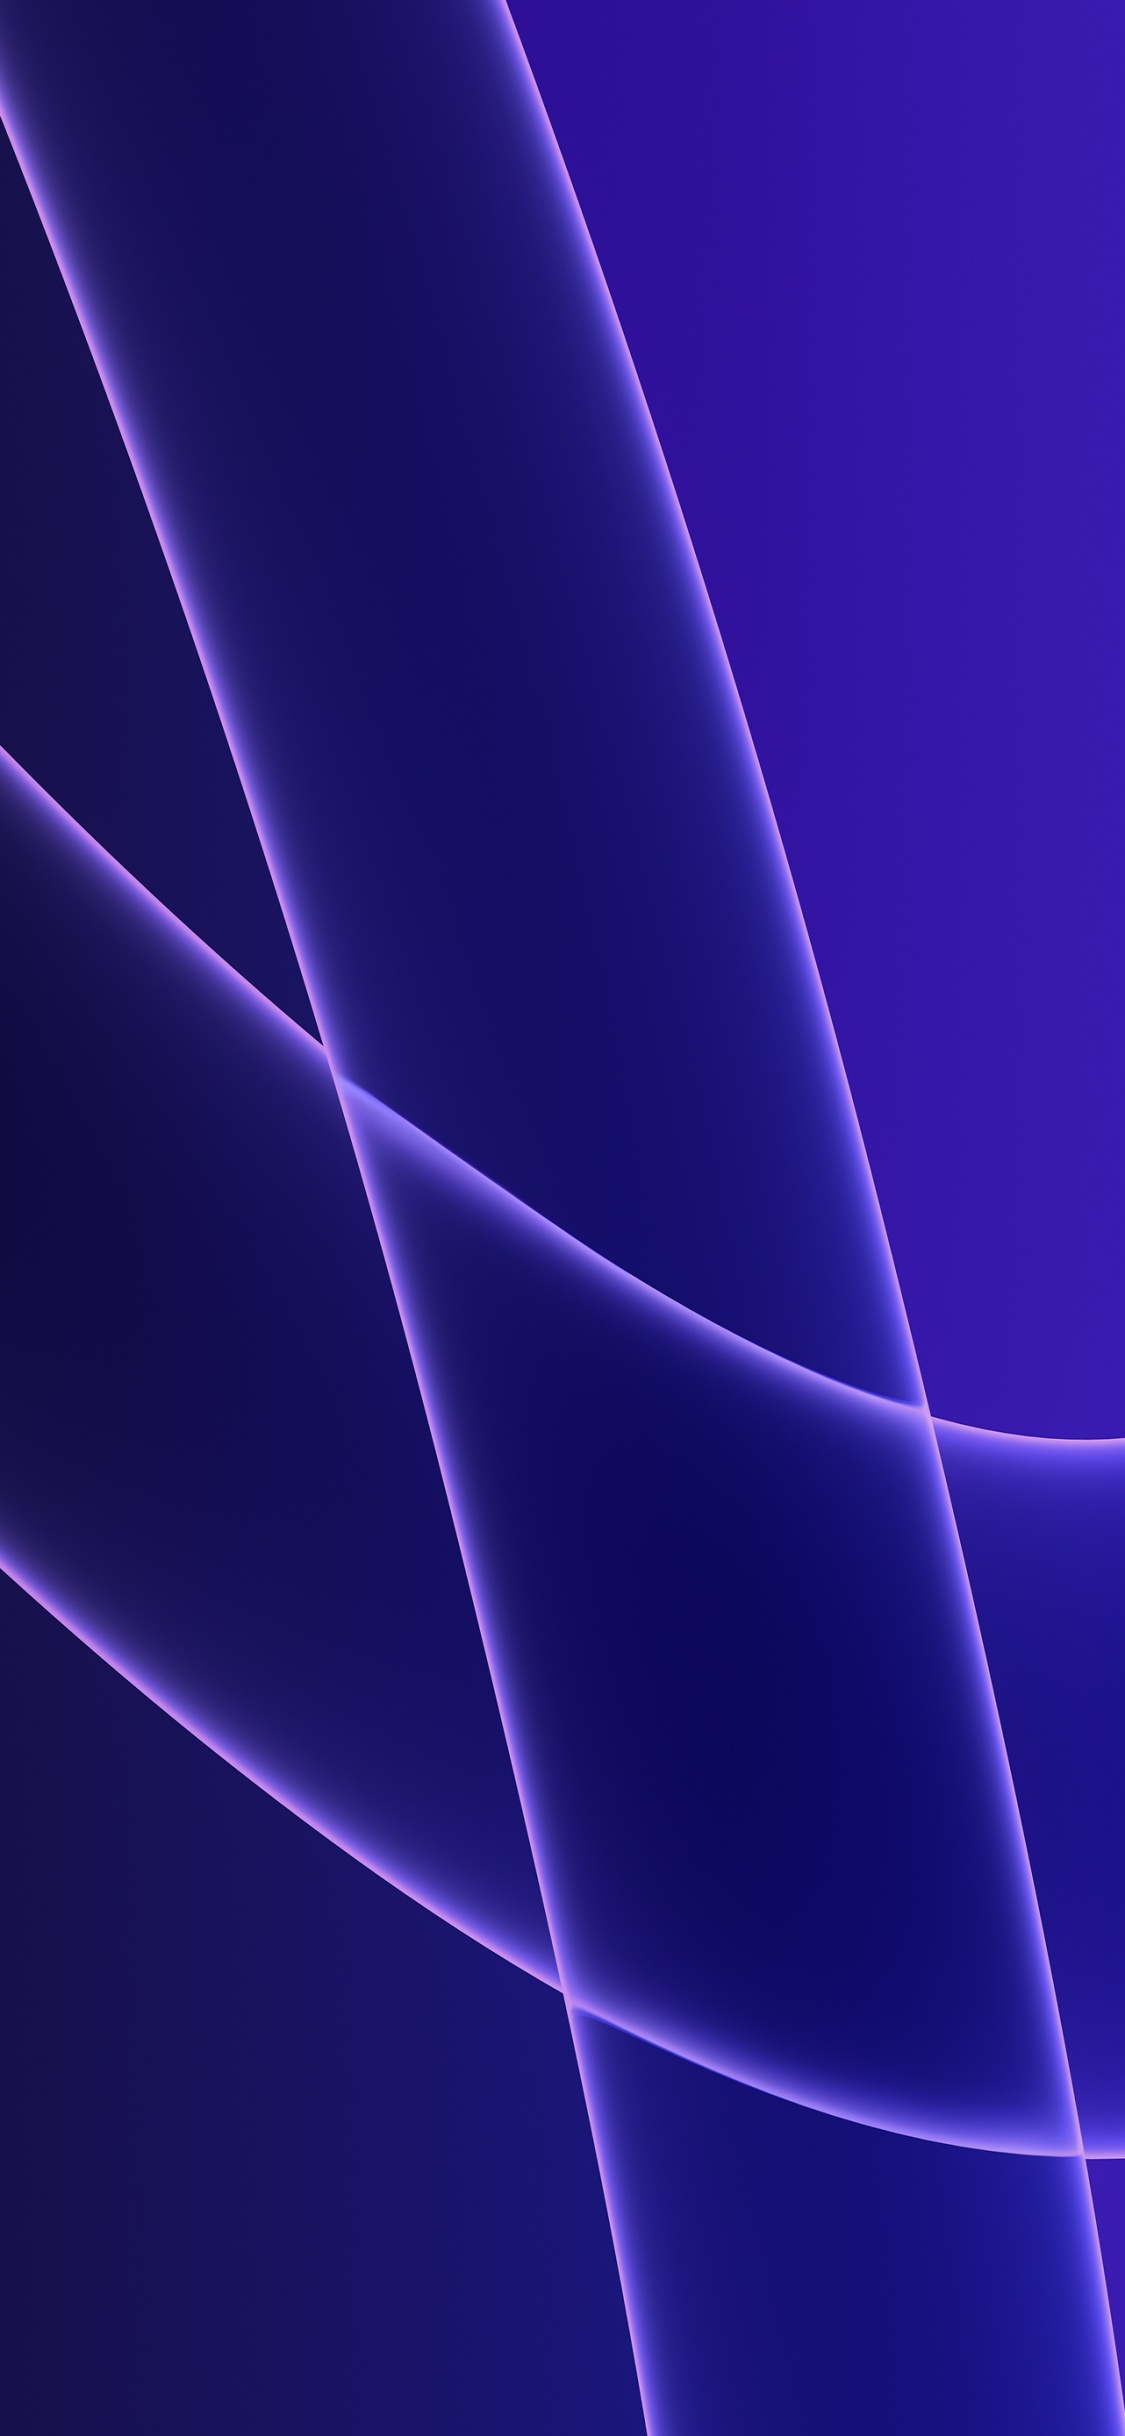 IMac Color Matching Wallpaper in Dark Purple for IPhone. Wallpaper in 1125x2436 Resolution